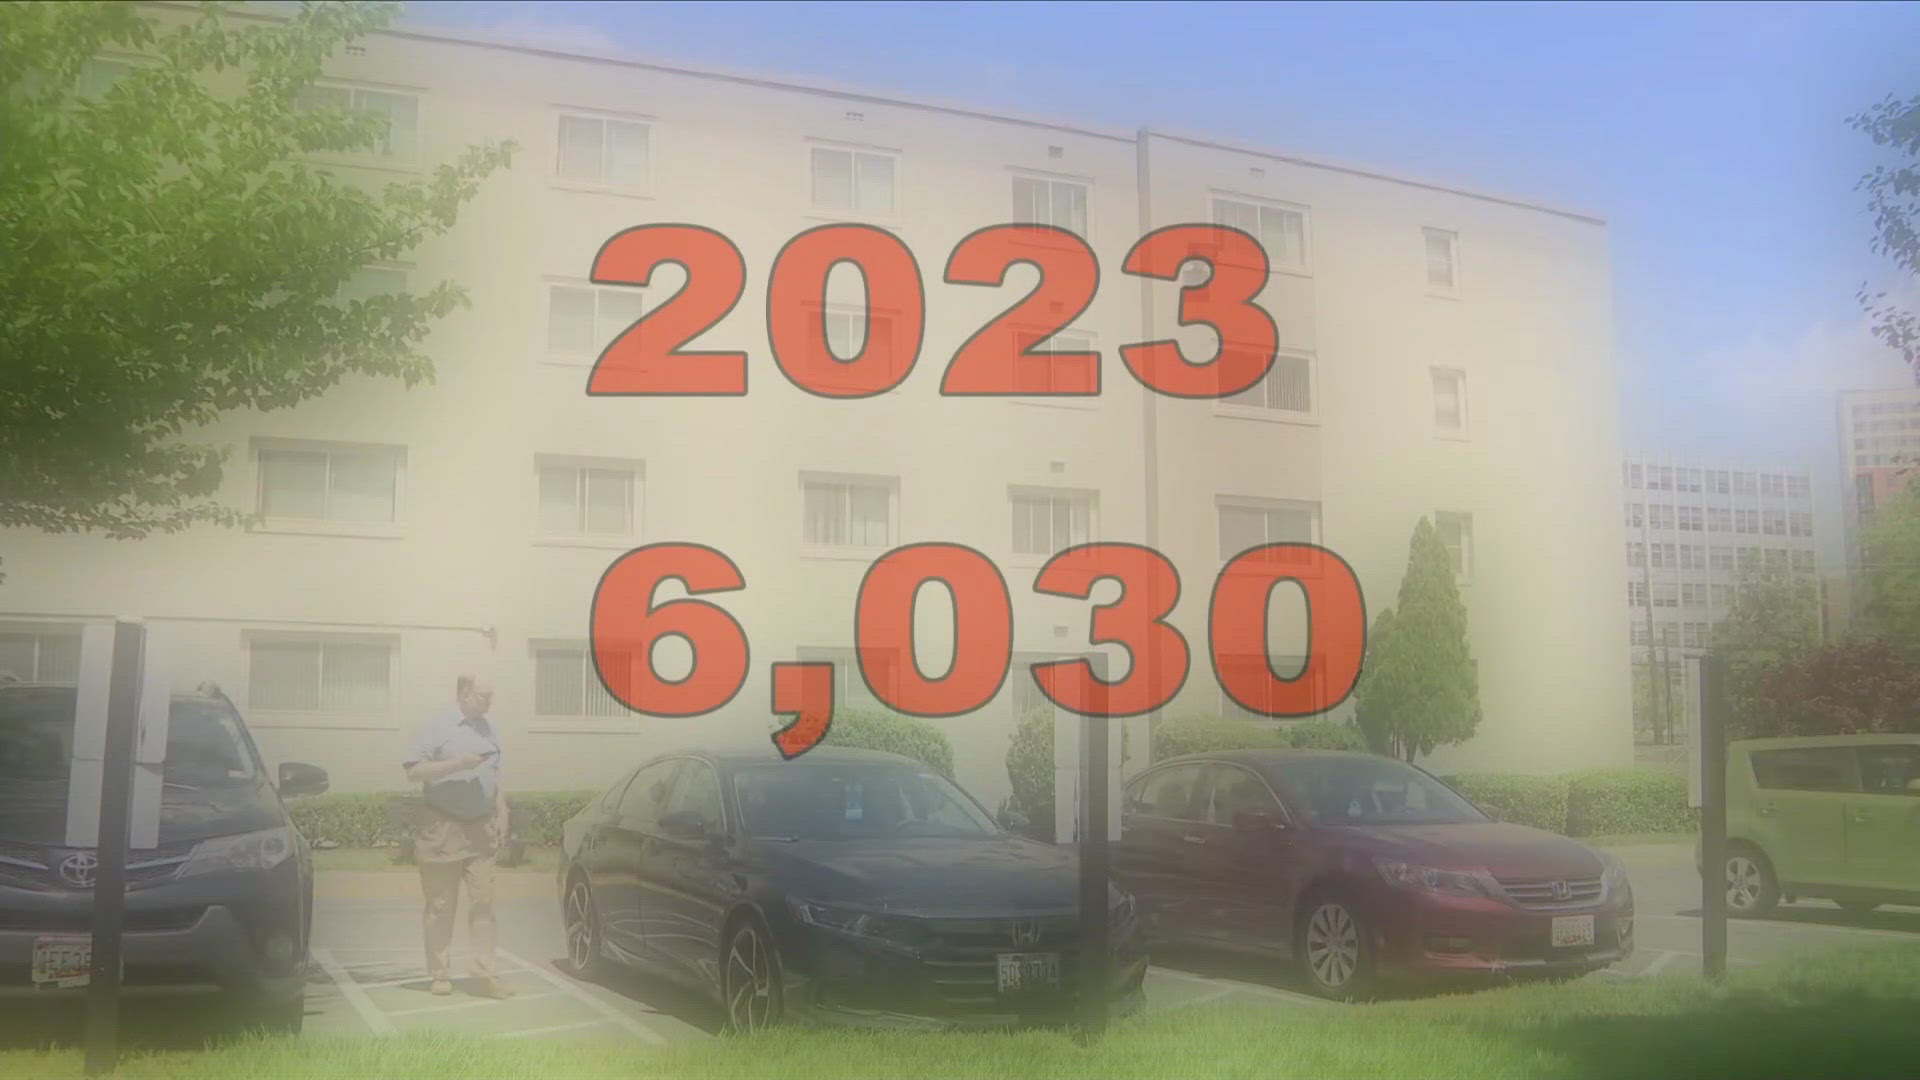 Residents at Summit Hills Apartments told WUSA9 they’ve been dealing with nearly 90-degree temperatures inside their unit and the AC hasn't been turned on yet.